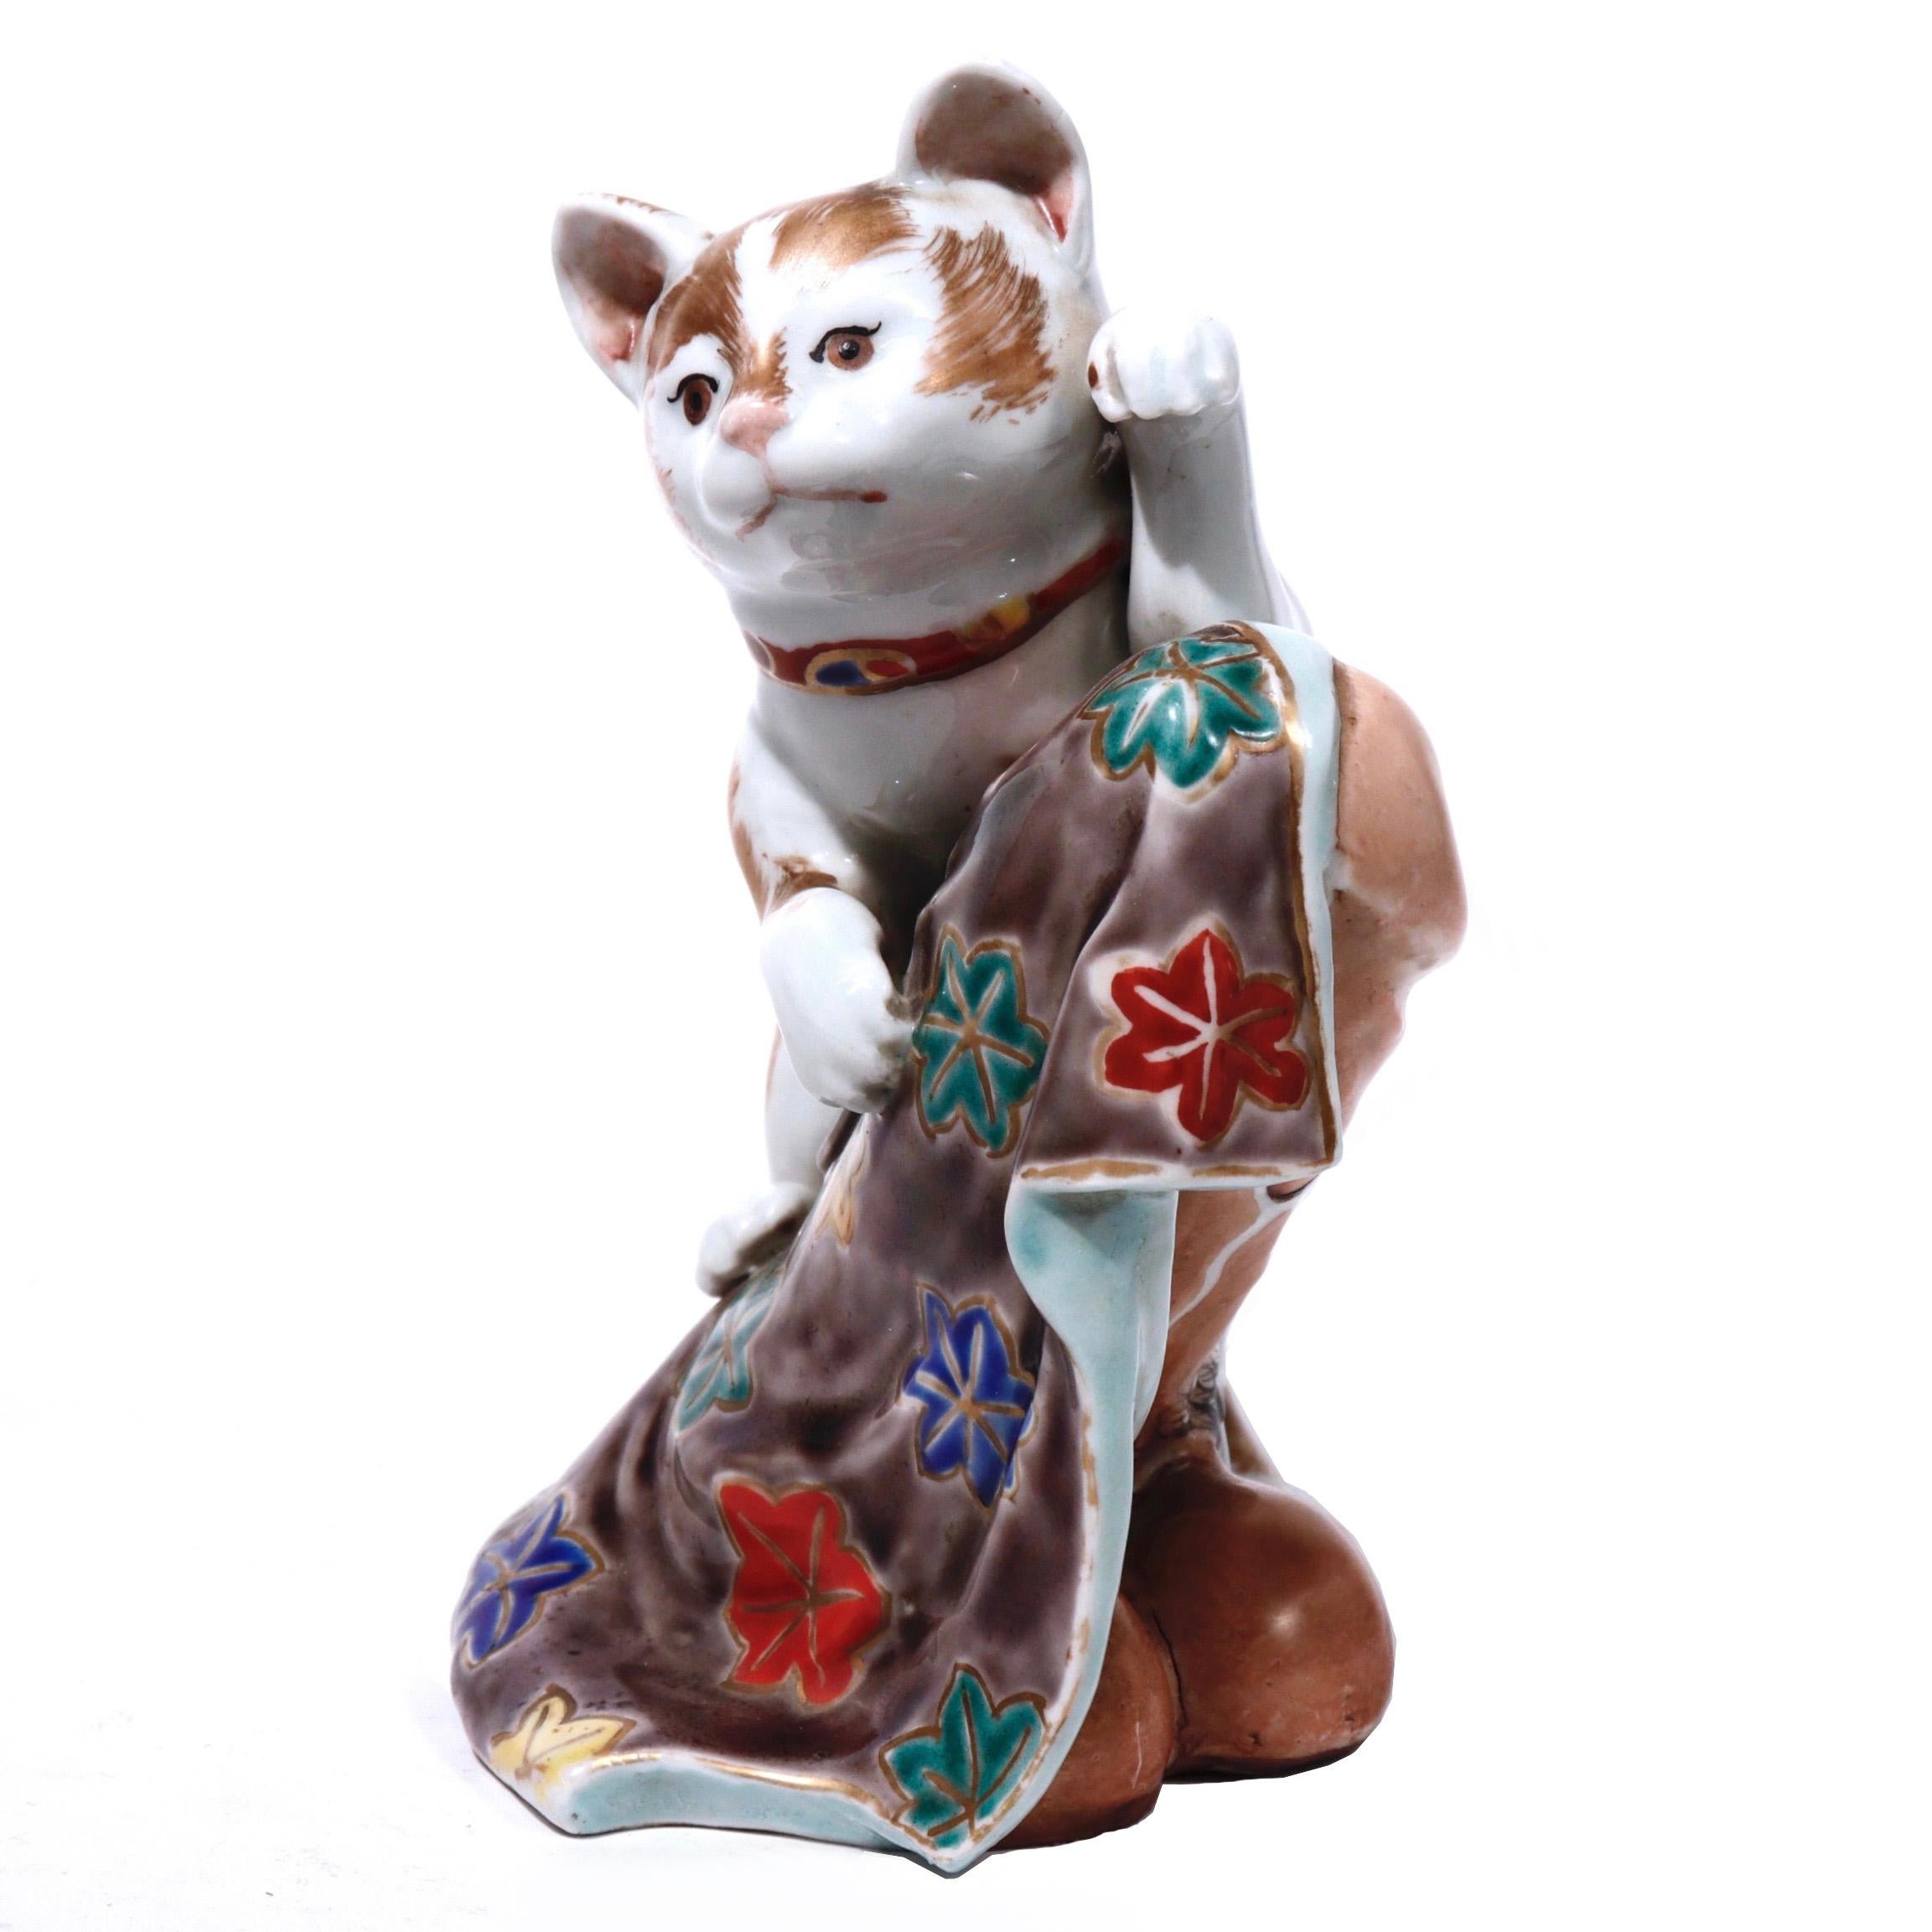 Unusual Japanese porcelain figural sculpture, Kutani style, of a provocative rendition of Maneki Neko the good luck beckoning shop cat combined with a partially covered phallus, together a wish for good fortune and fertility/strength/union, the cat